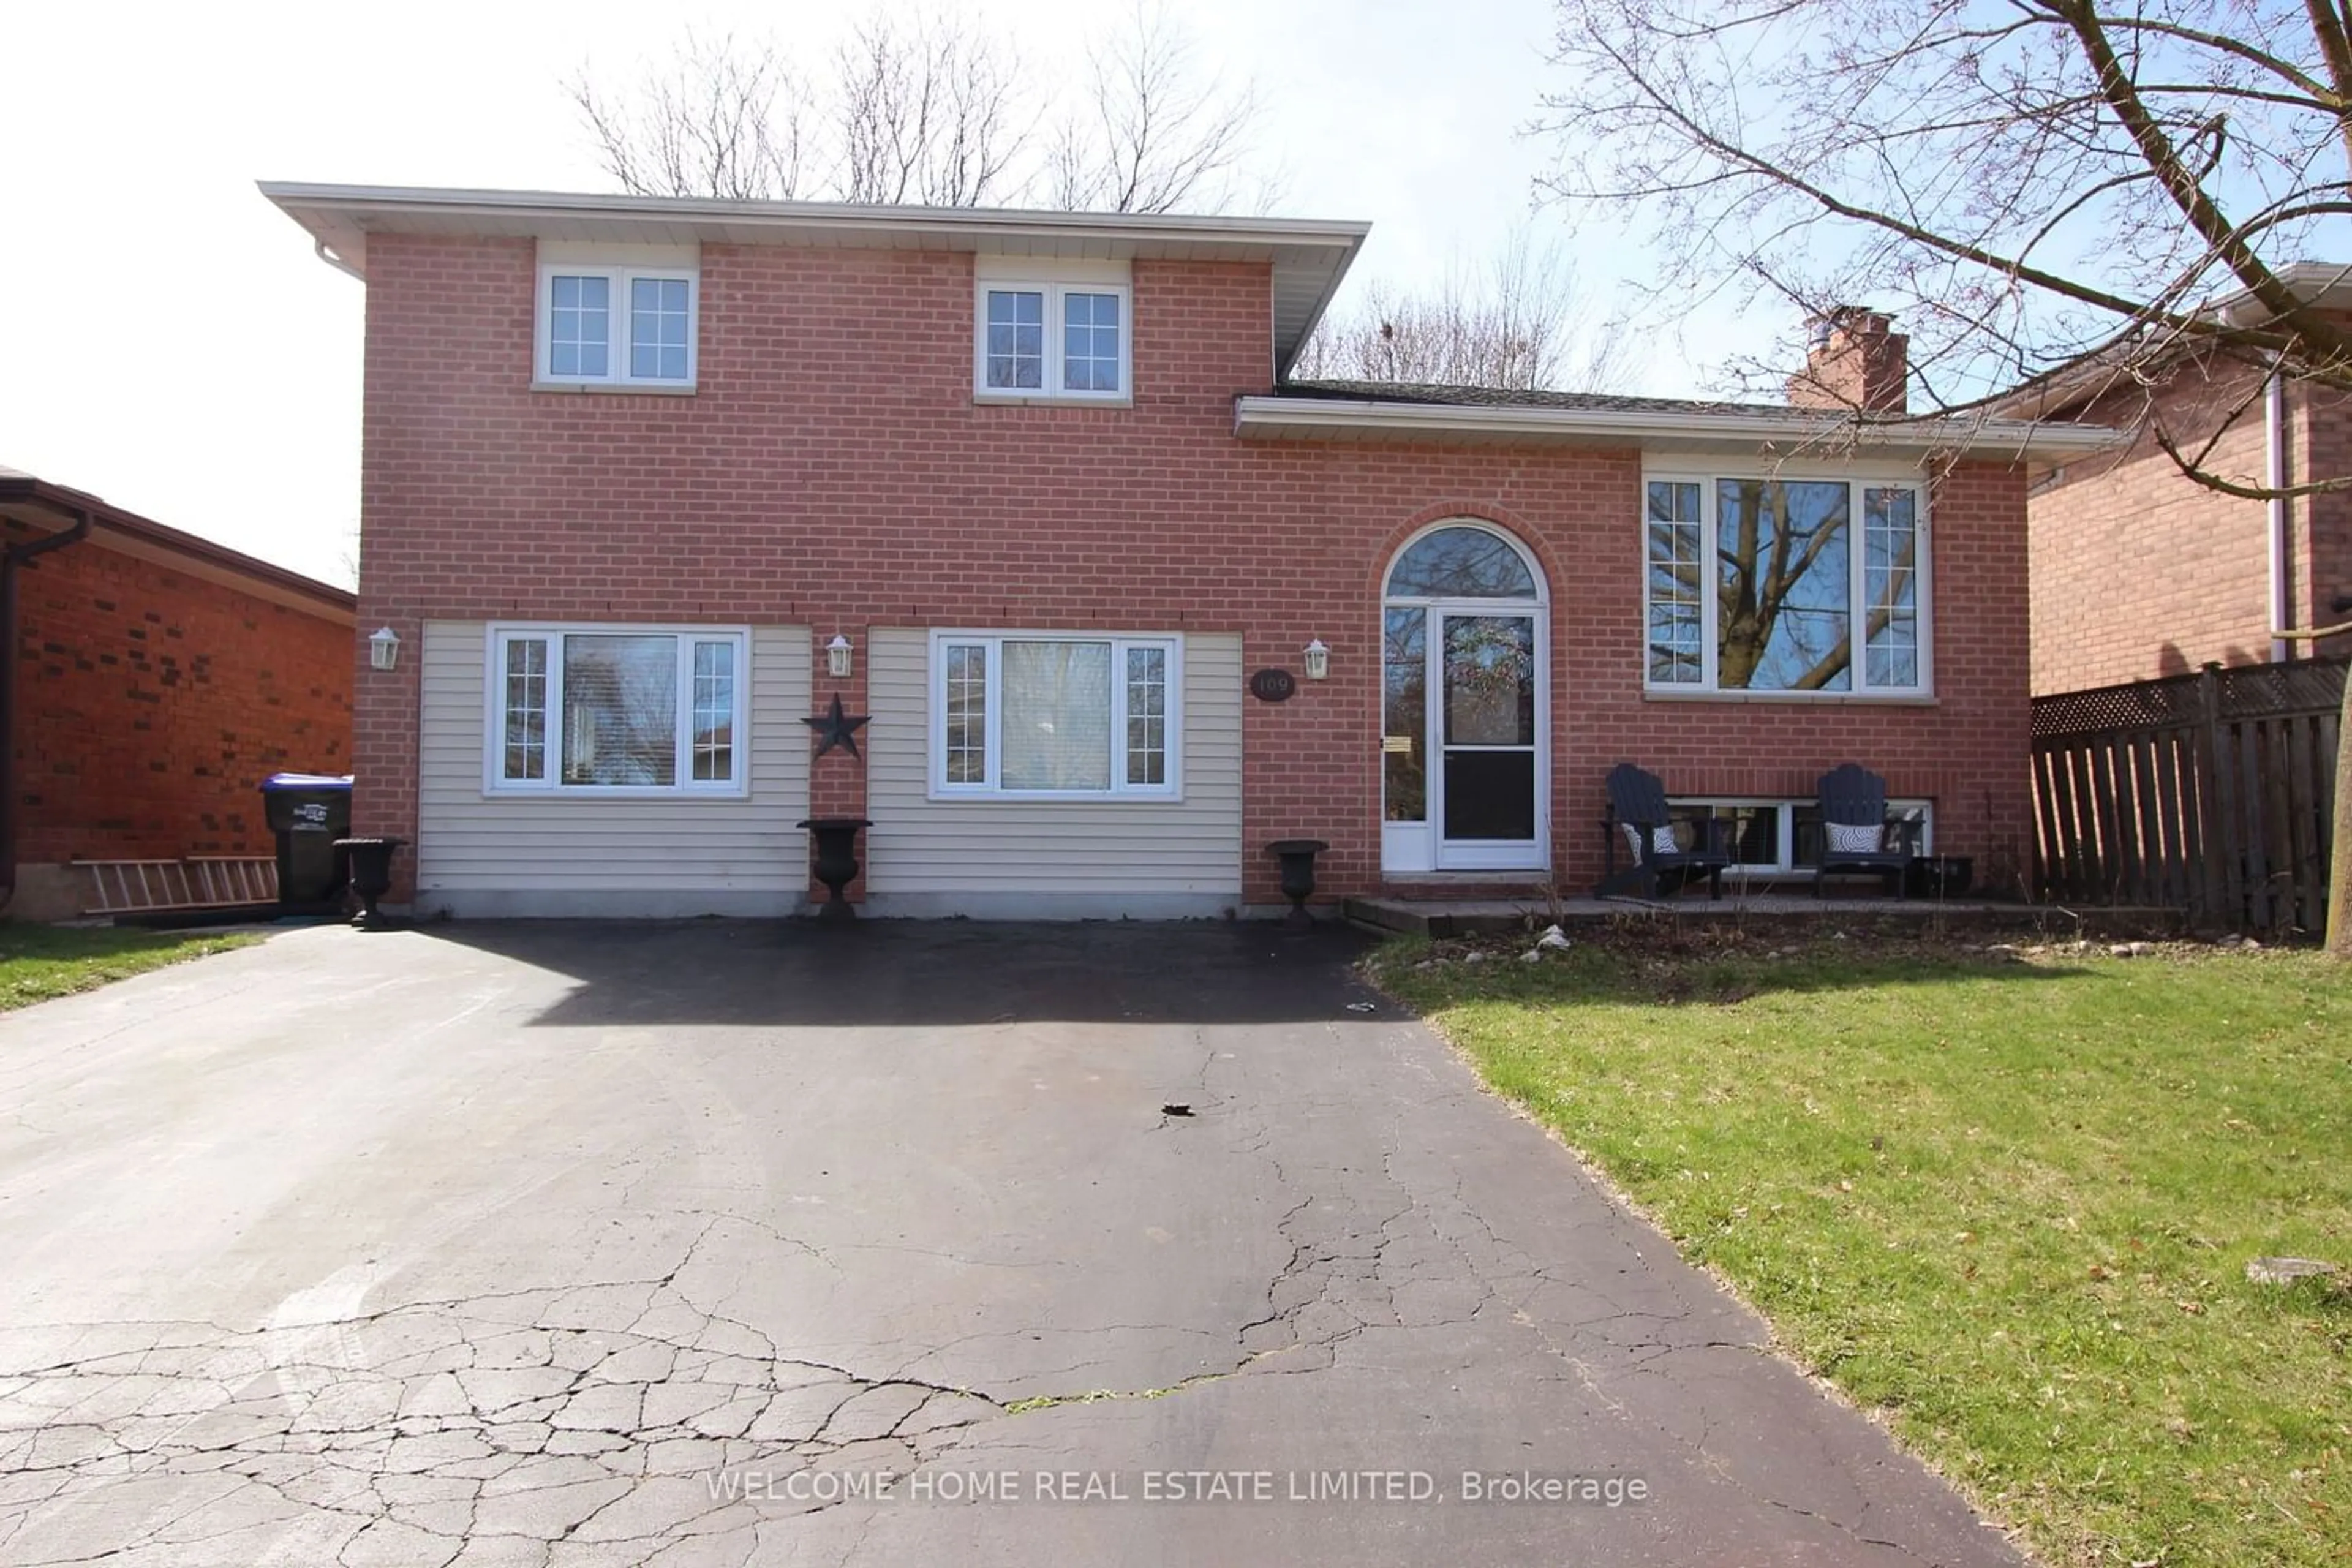 Home with brick exterior material for 109 Cunningham Dr, New Tecumseth Ontario L9R 1C6